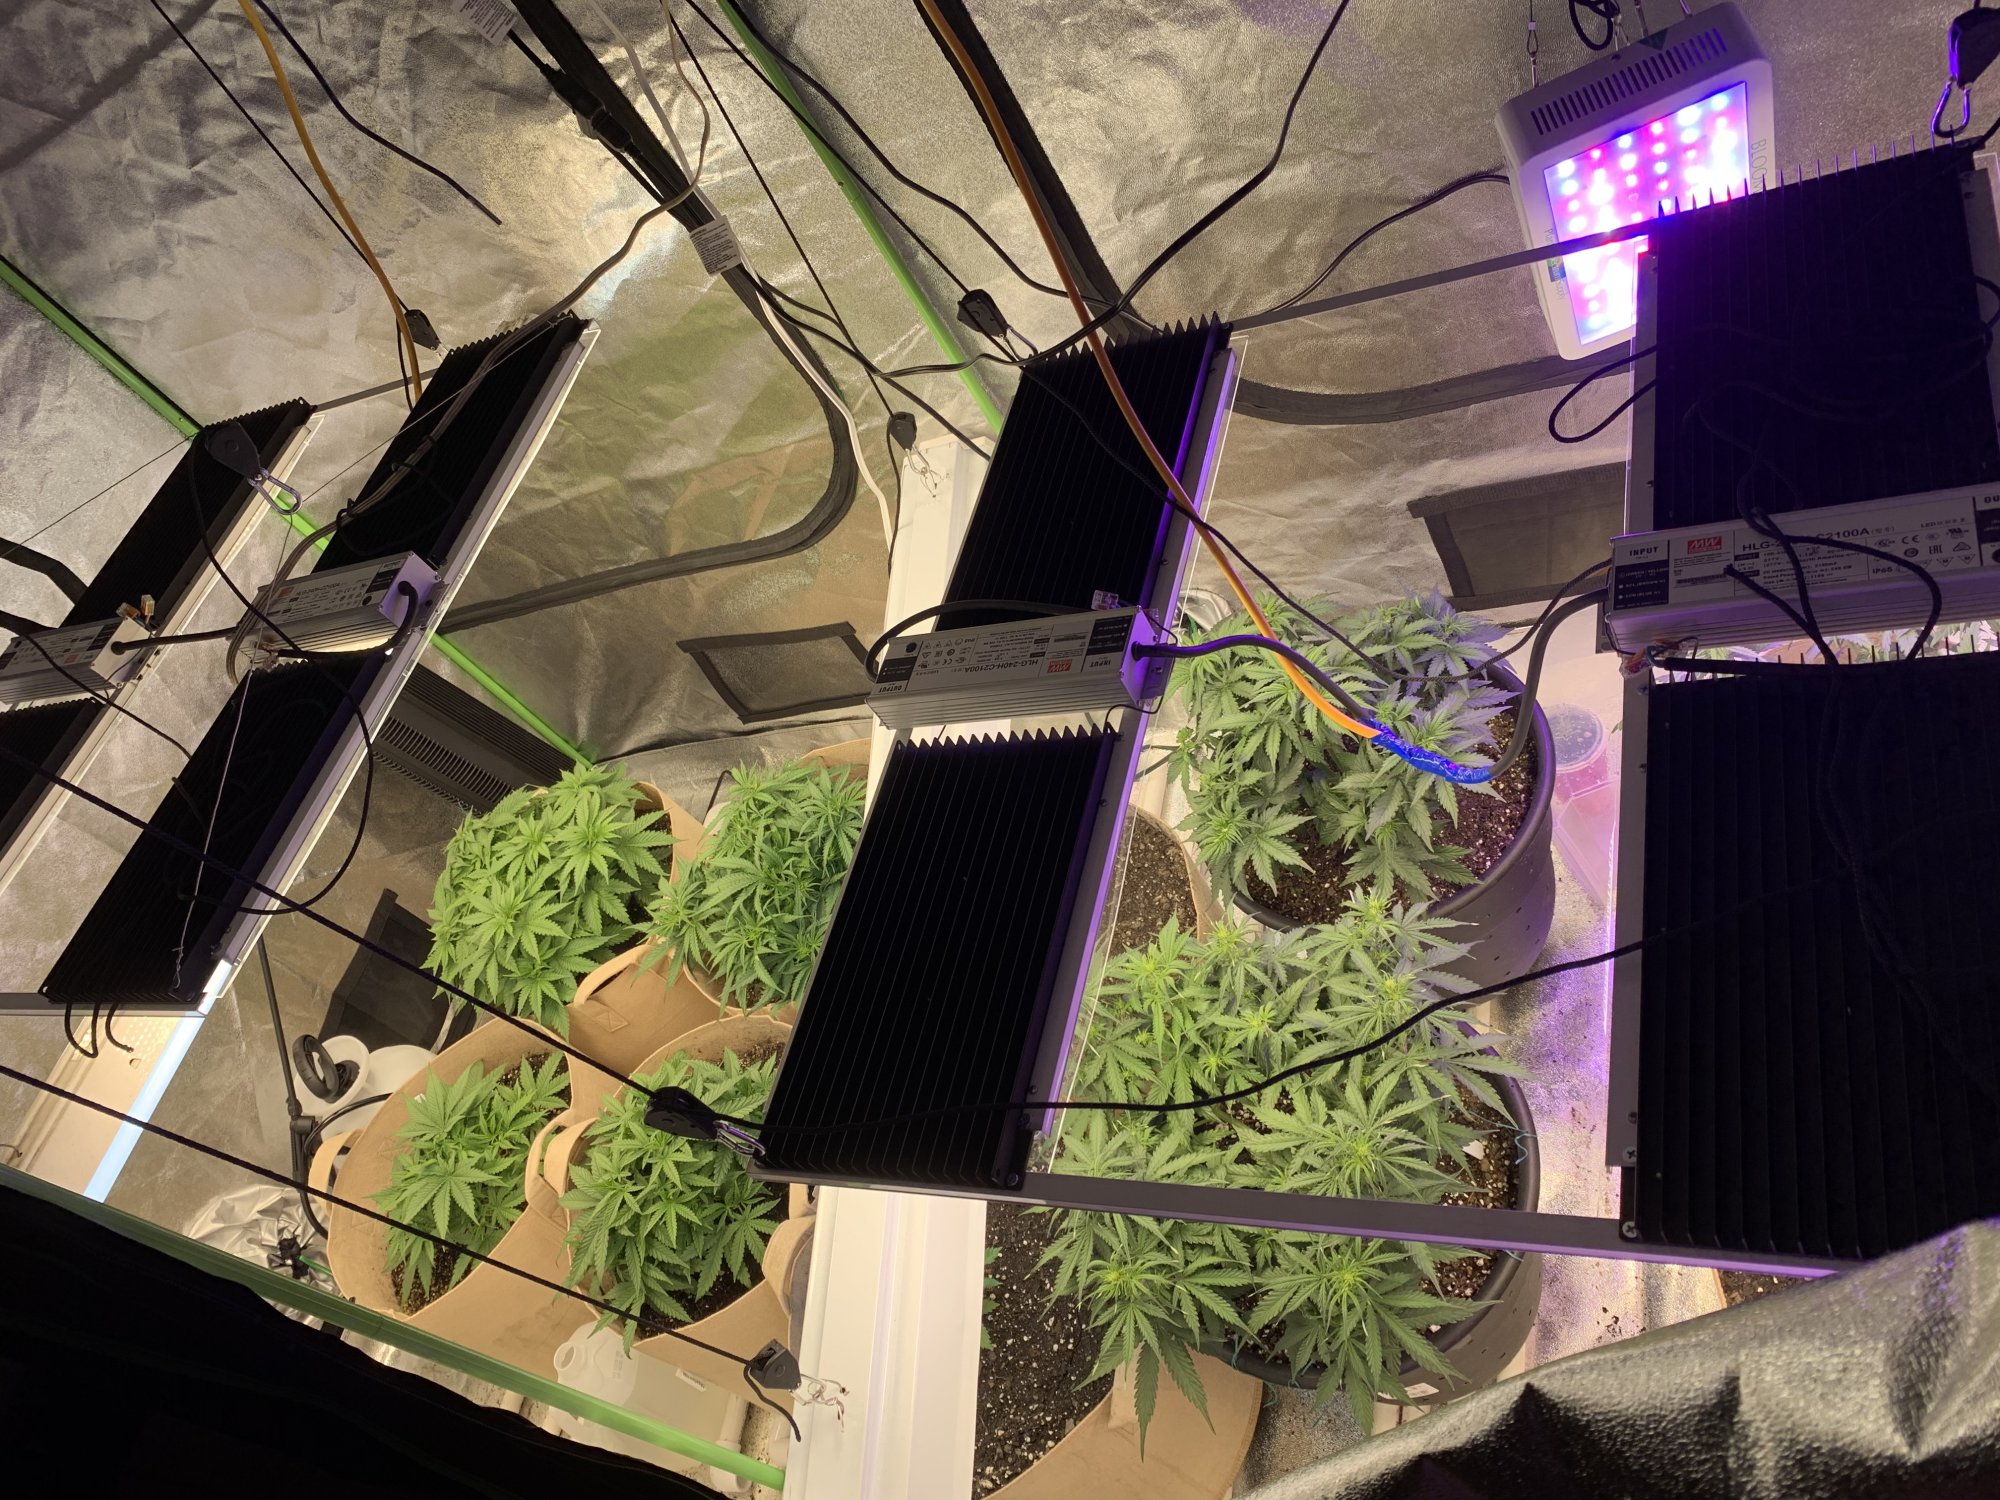 New grower using hlg quantum boards